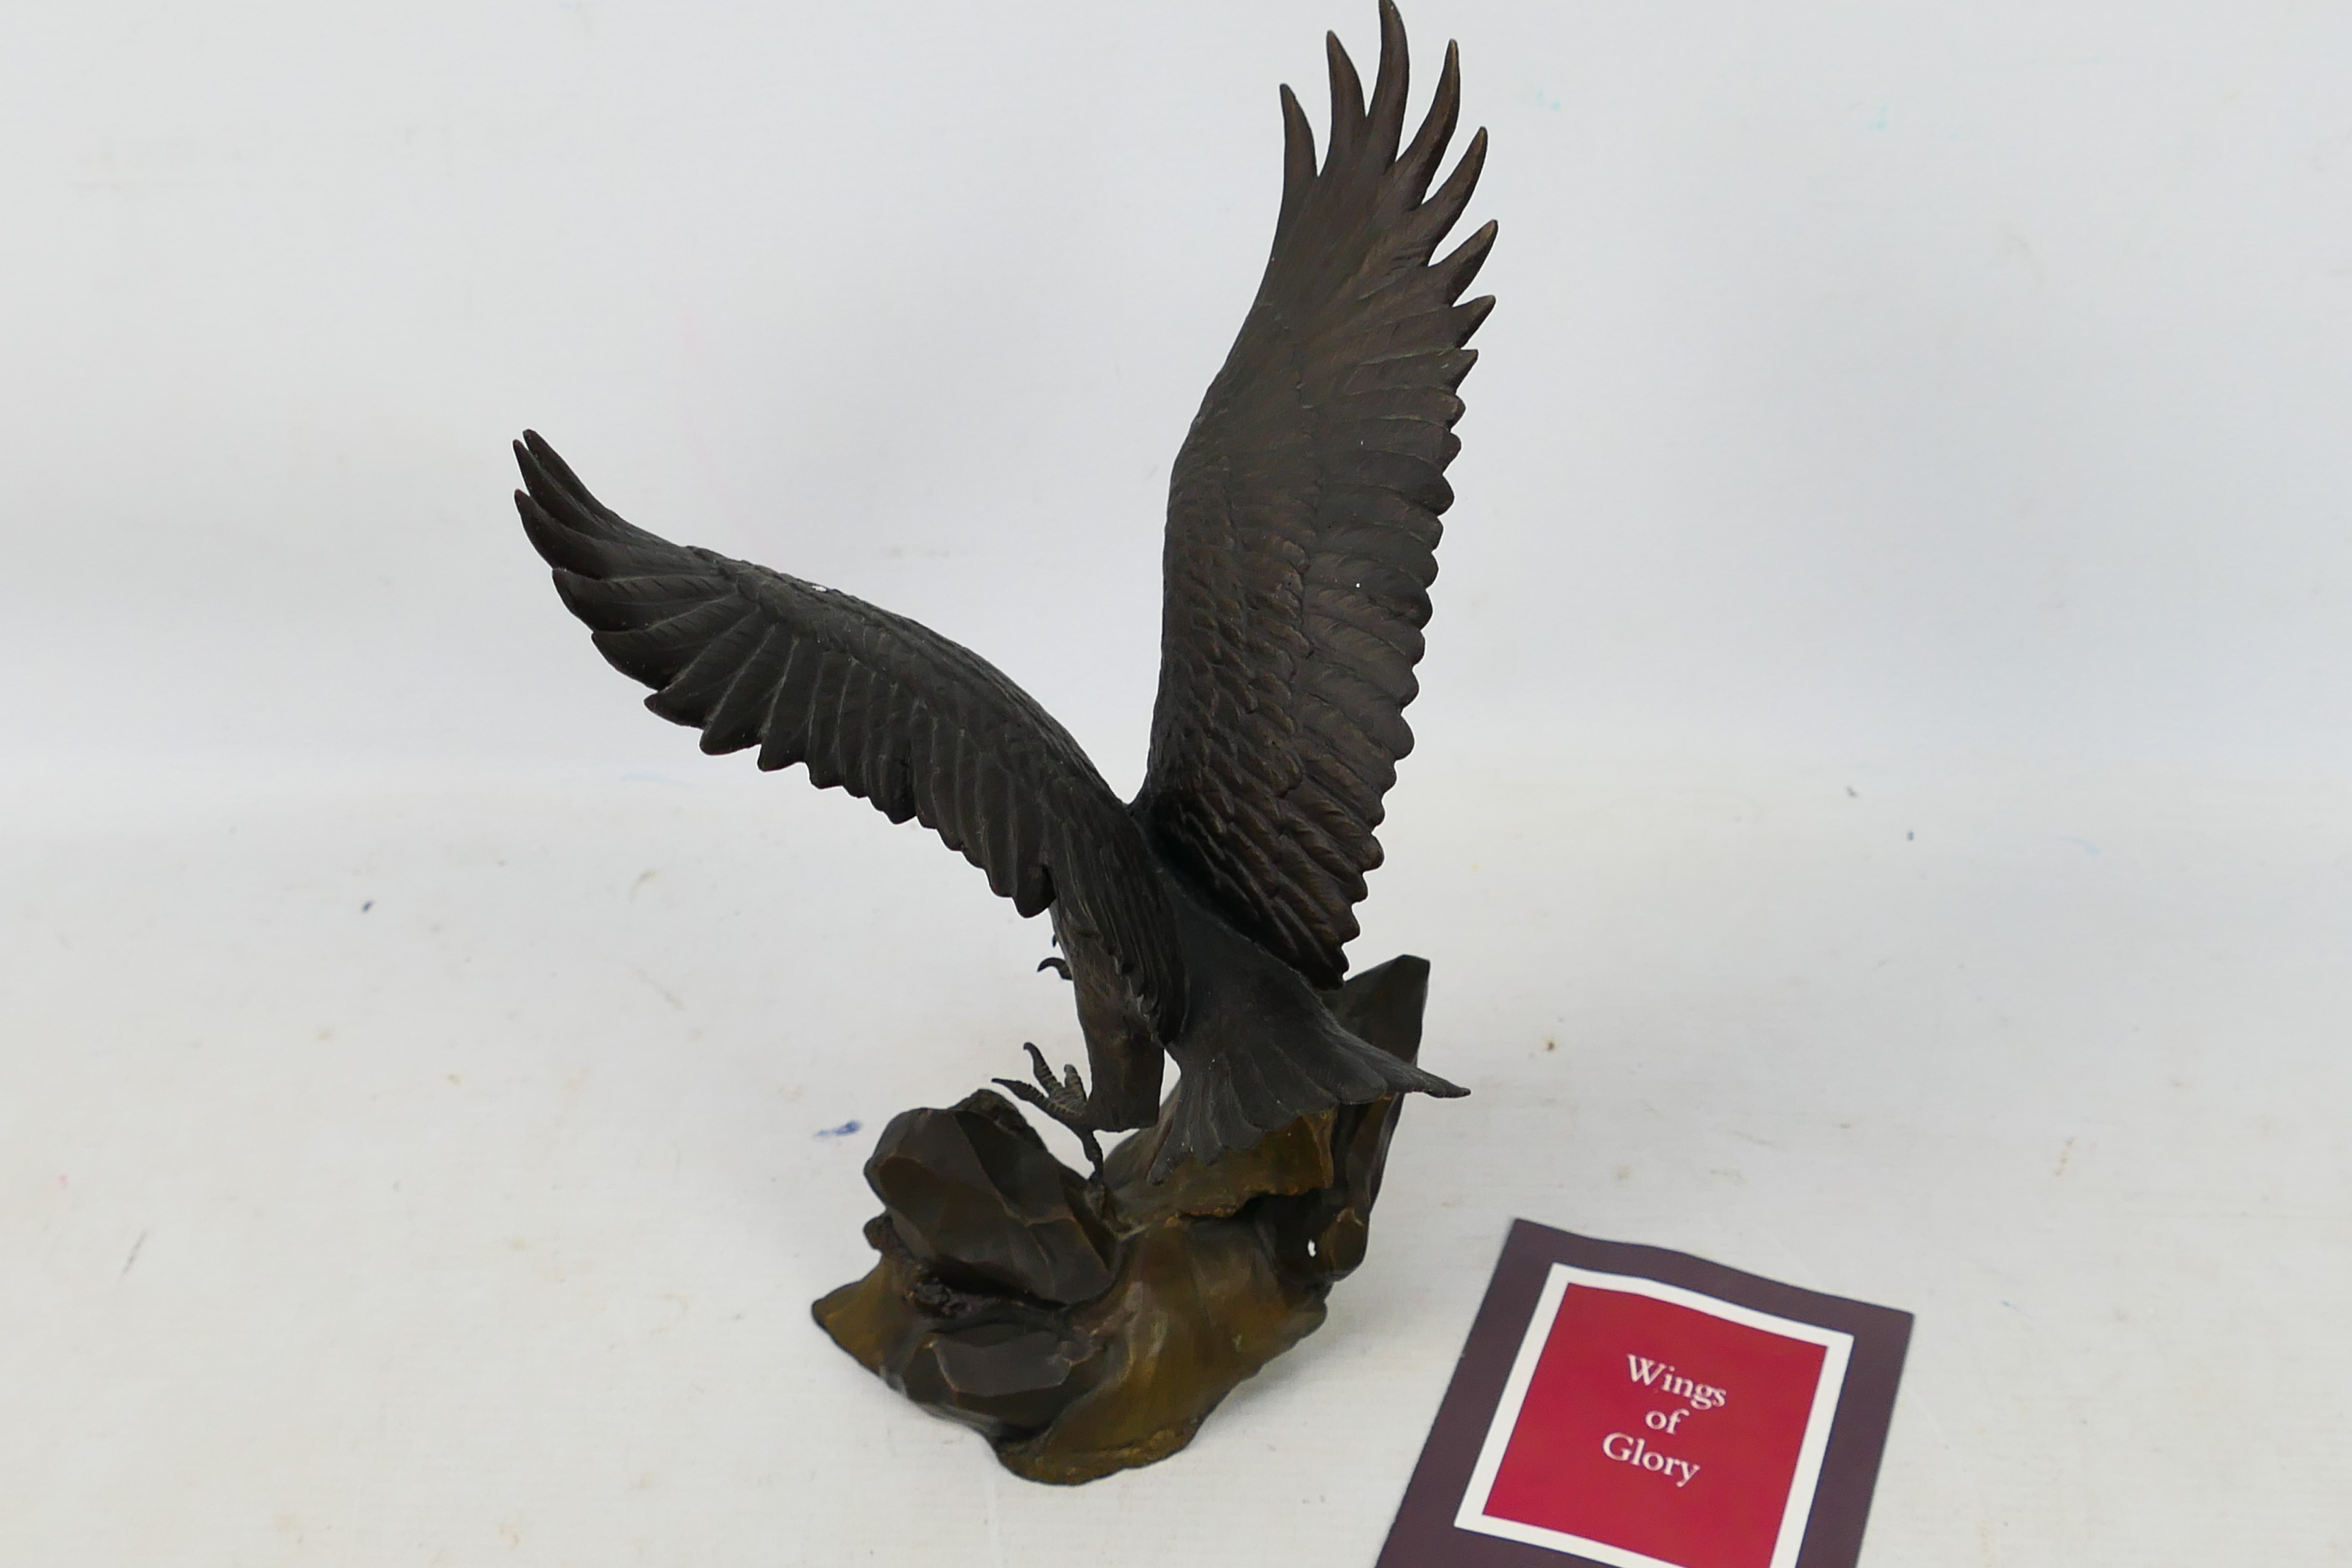 Franklin Mint - Wings of Glory - A bronze bald eagle statue by Ronald Van Ruyckevelt - Bronze - Image 4 of 5